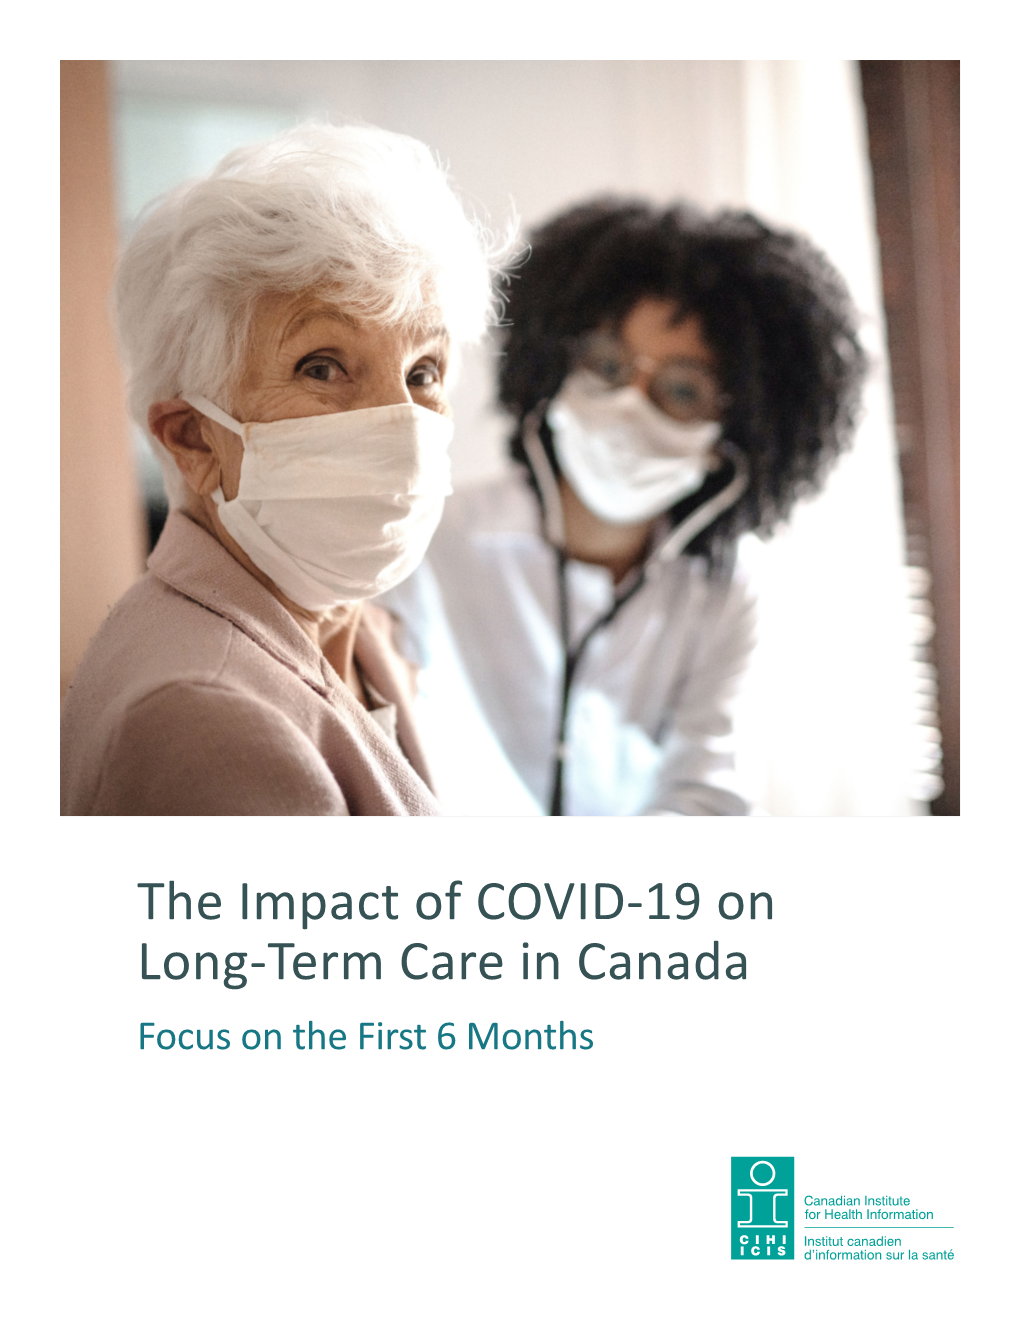 The Impact of COVID-19 on Long-Term Care in Canada